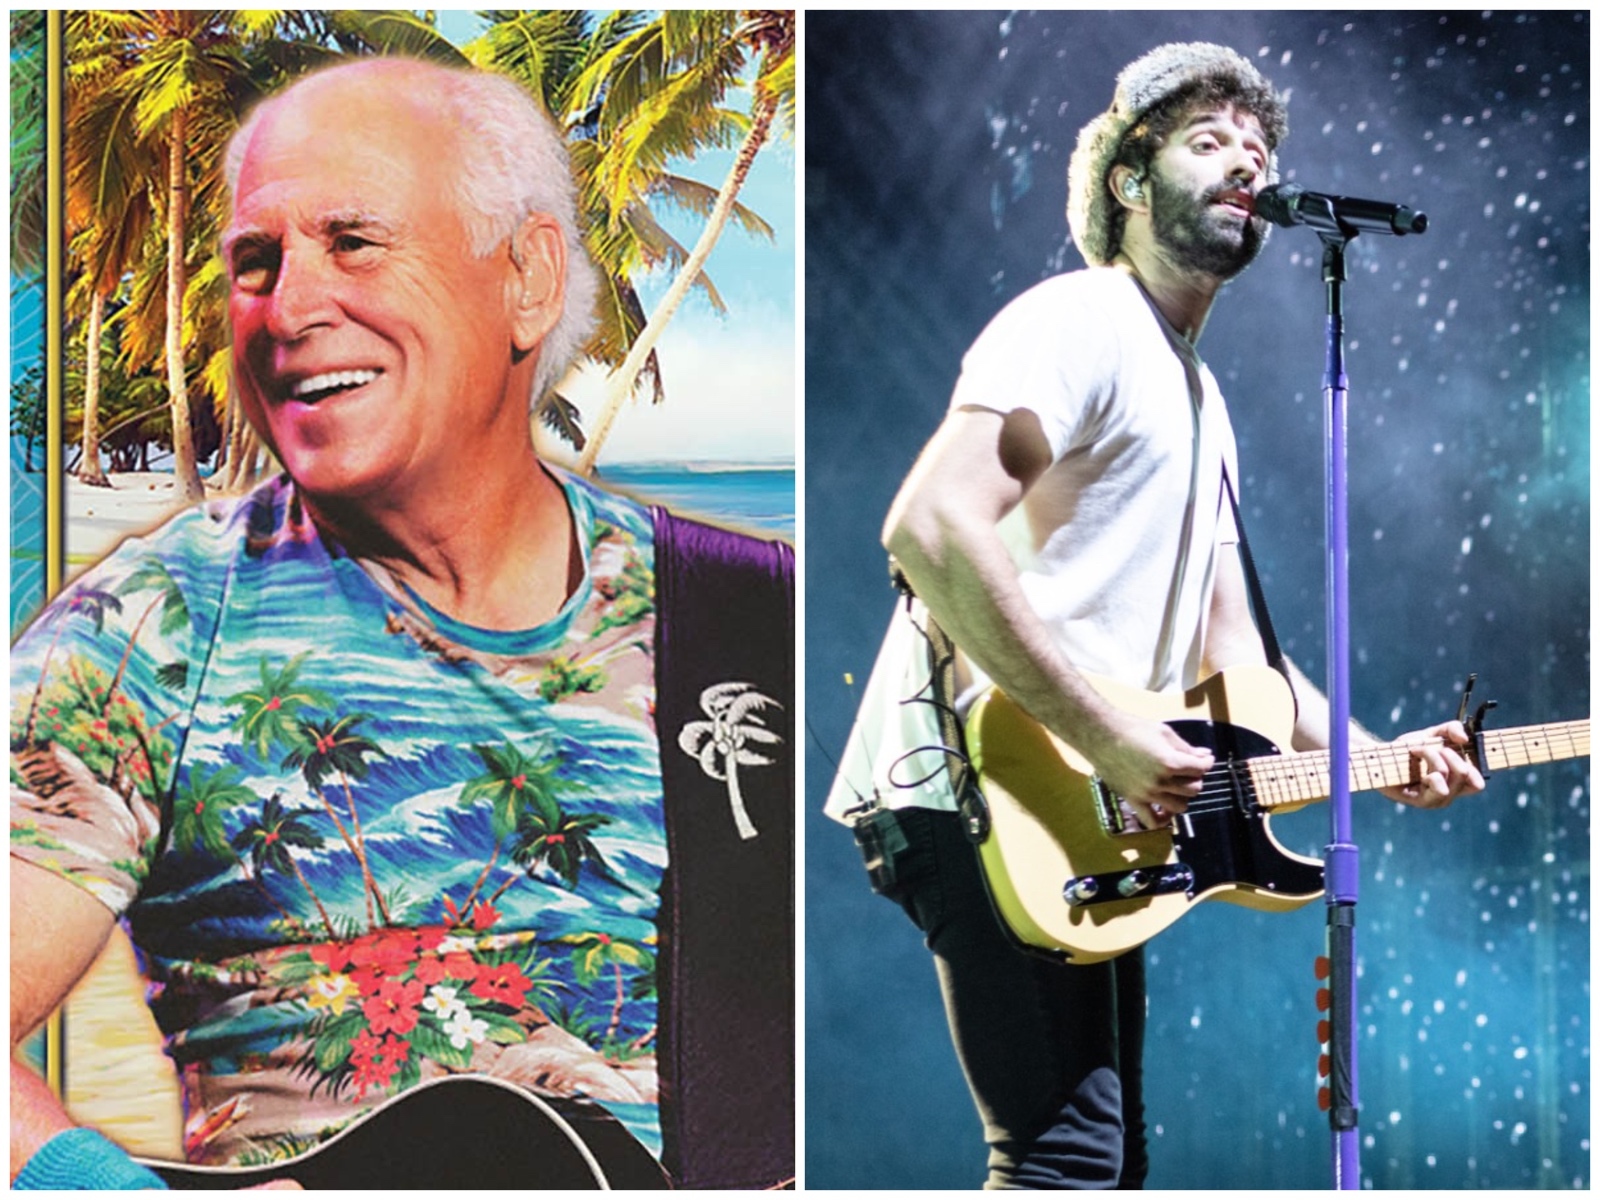 Summerfest's Jimmy Buffett Amp show canceled, replaced by AJR